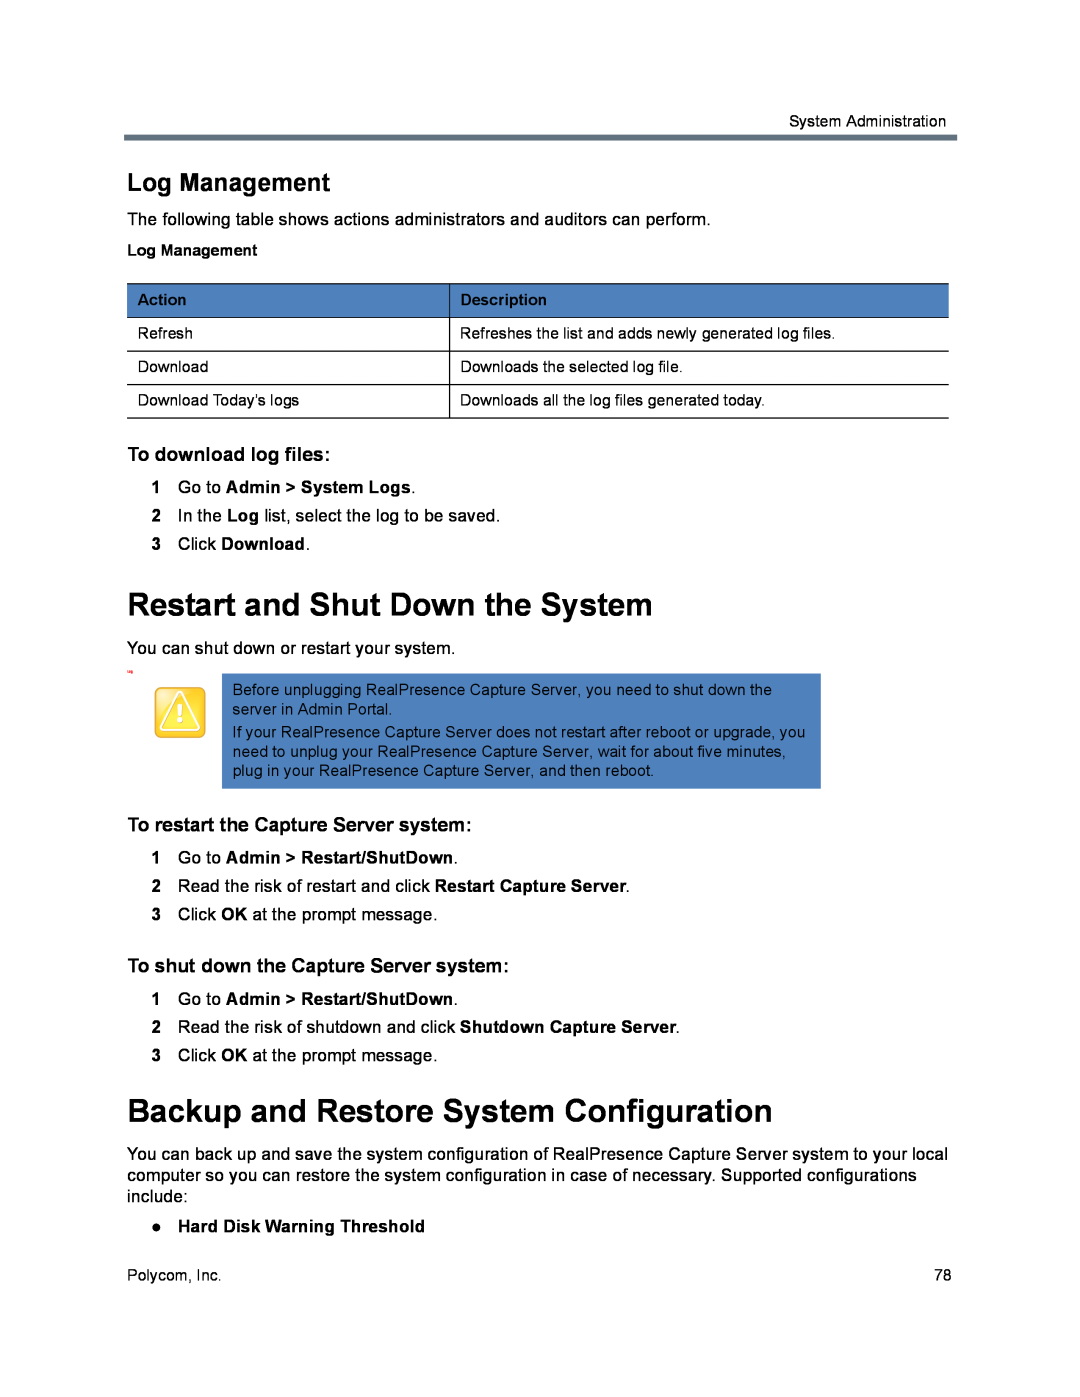 Polycom 40/0 Restart and Shut Down the System, Backup and Restore System Configuration, Log Management, Click Download 